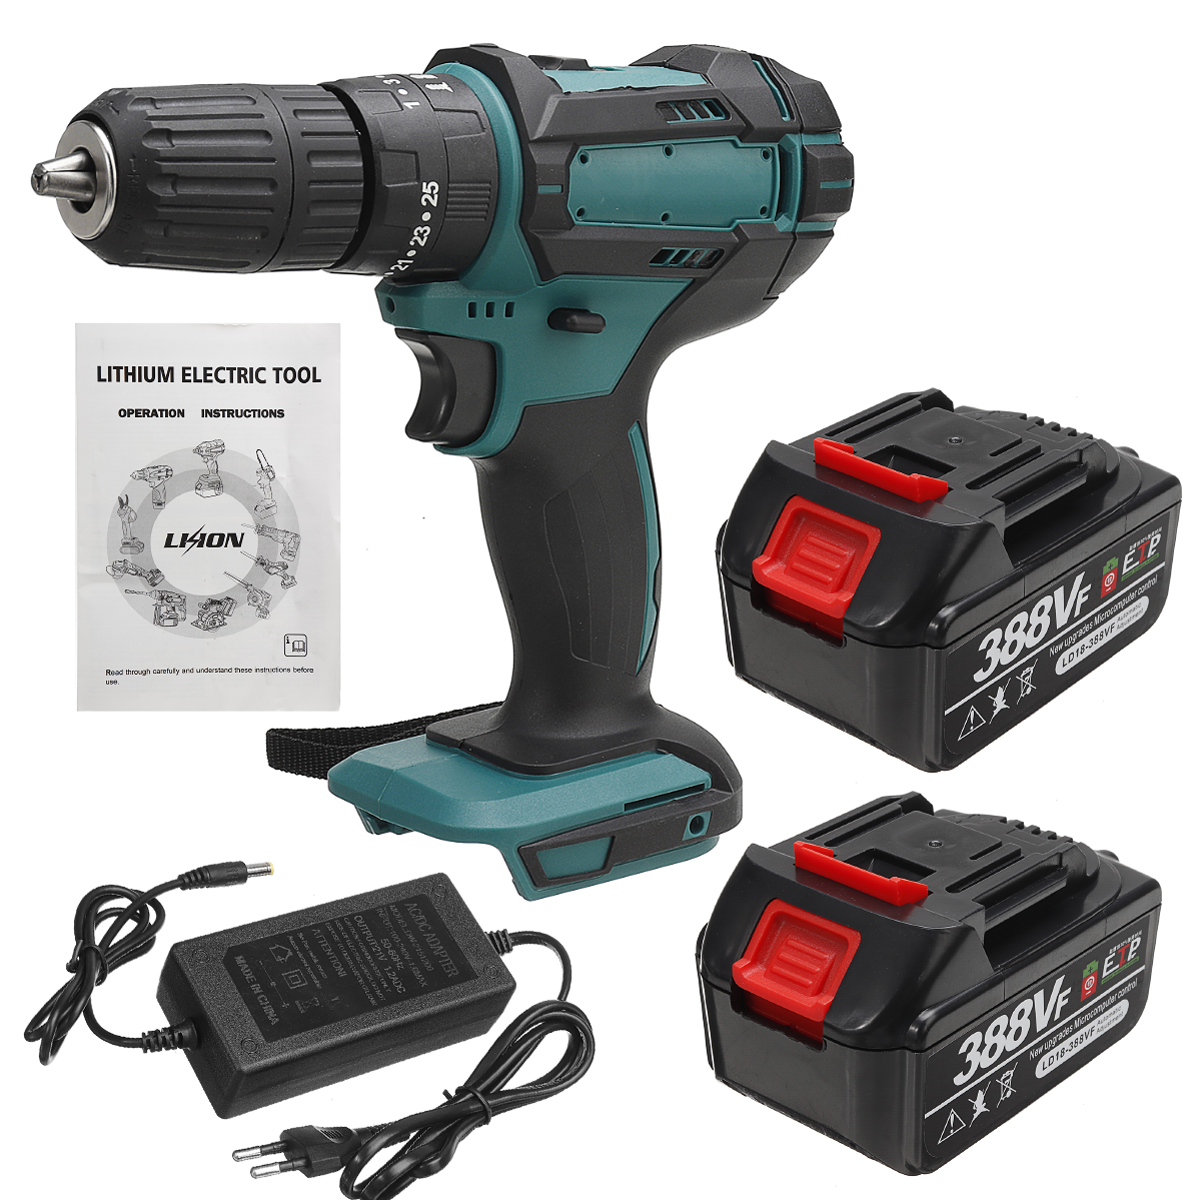 388VF-1500W-Electric-Cordless-Impact-Drill-LED-Working-Light-Rechargeable-Woodworking-Maintenance-To-1920355-10